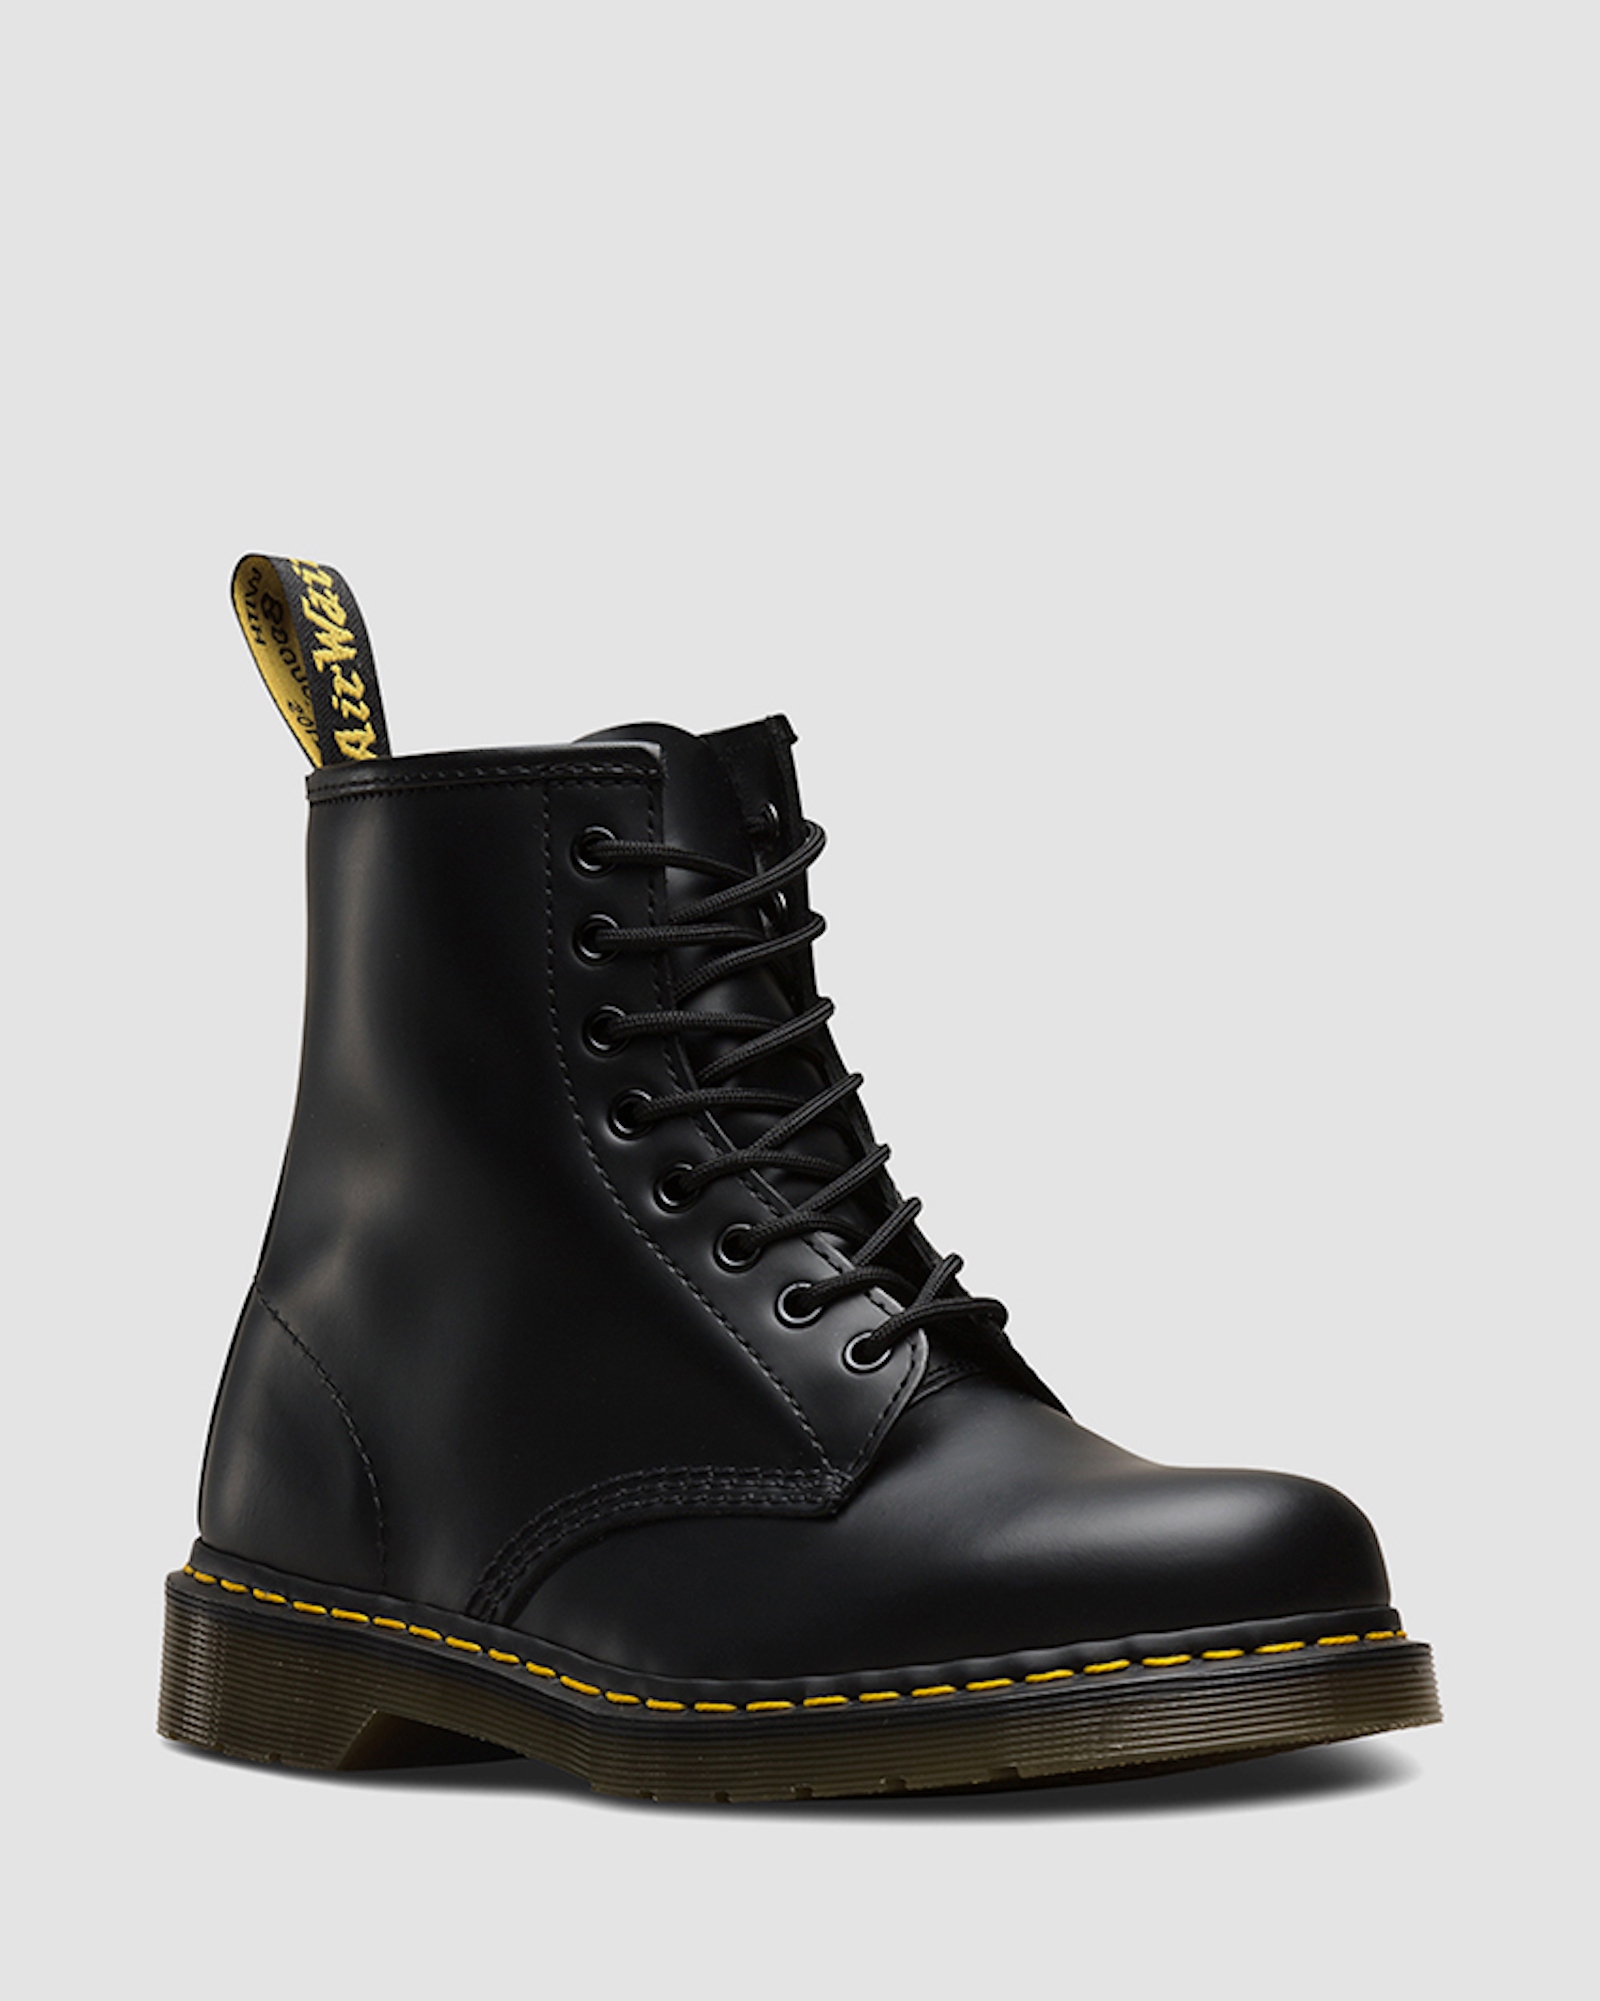 Top 7 Fashion Trends To Rock in Tokyo This Winter Doc Martens - Savvy Tokyo